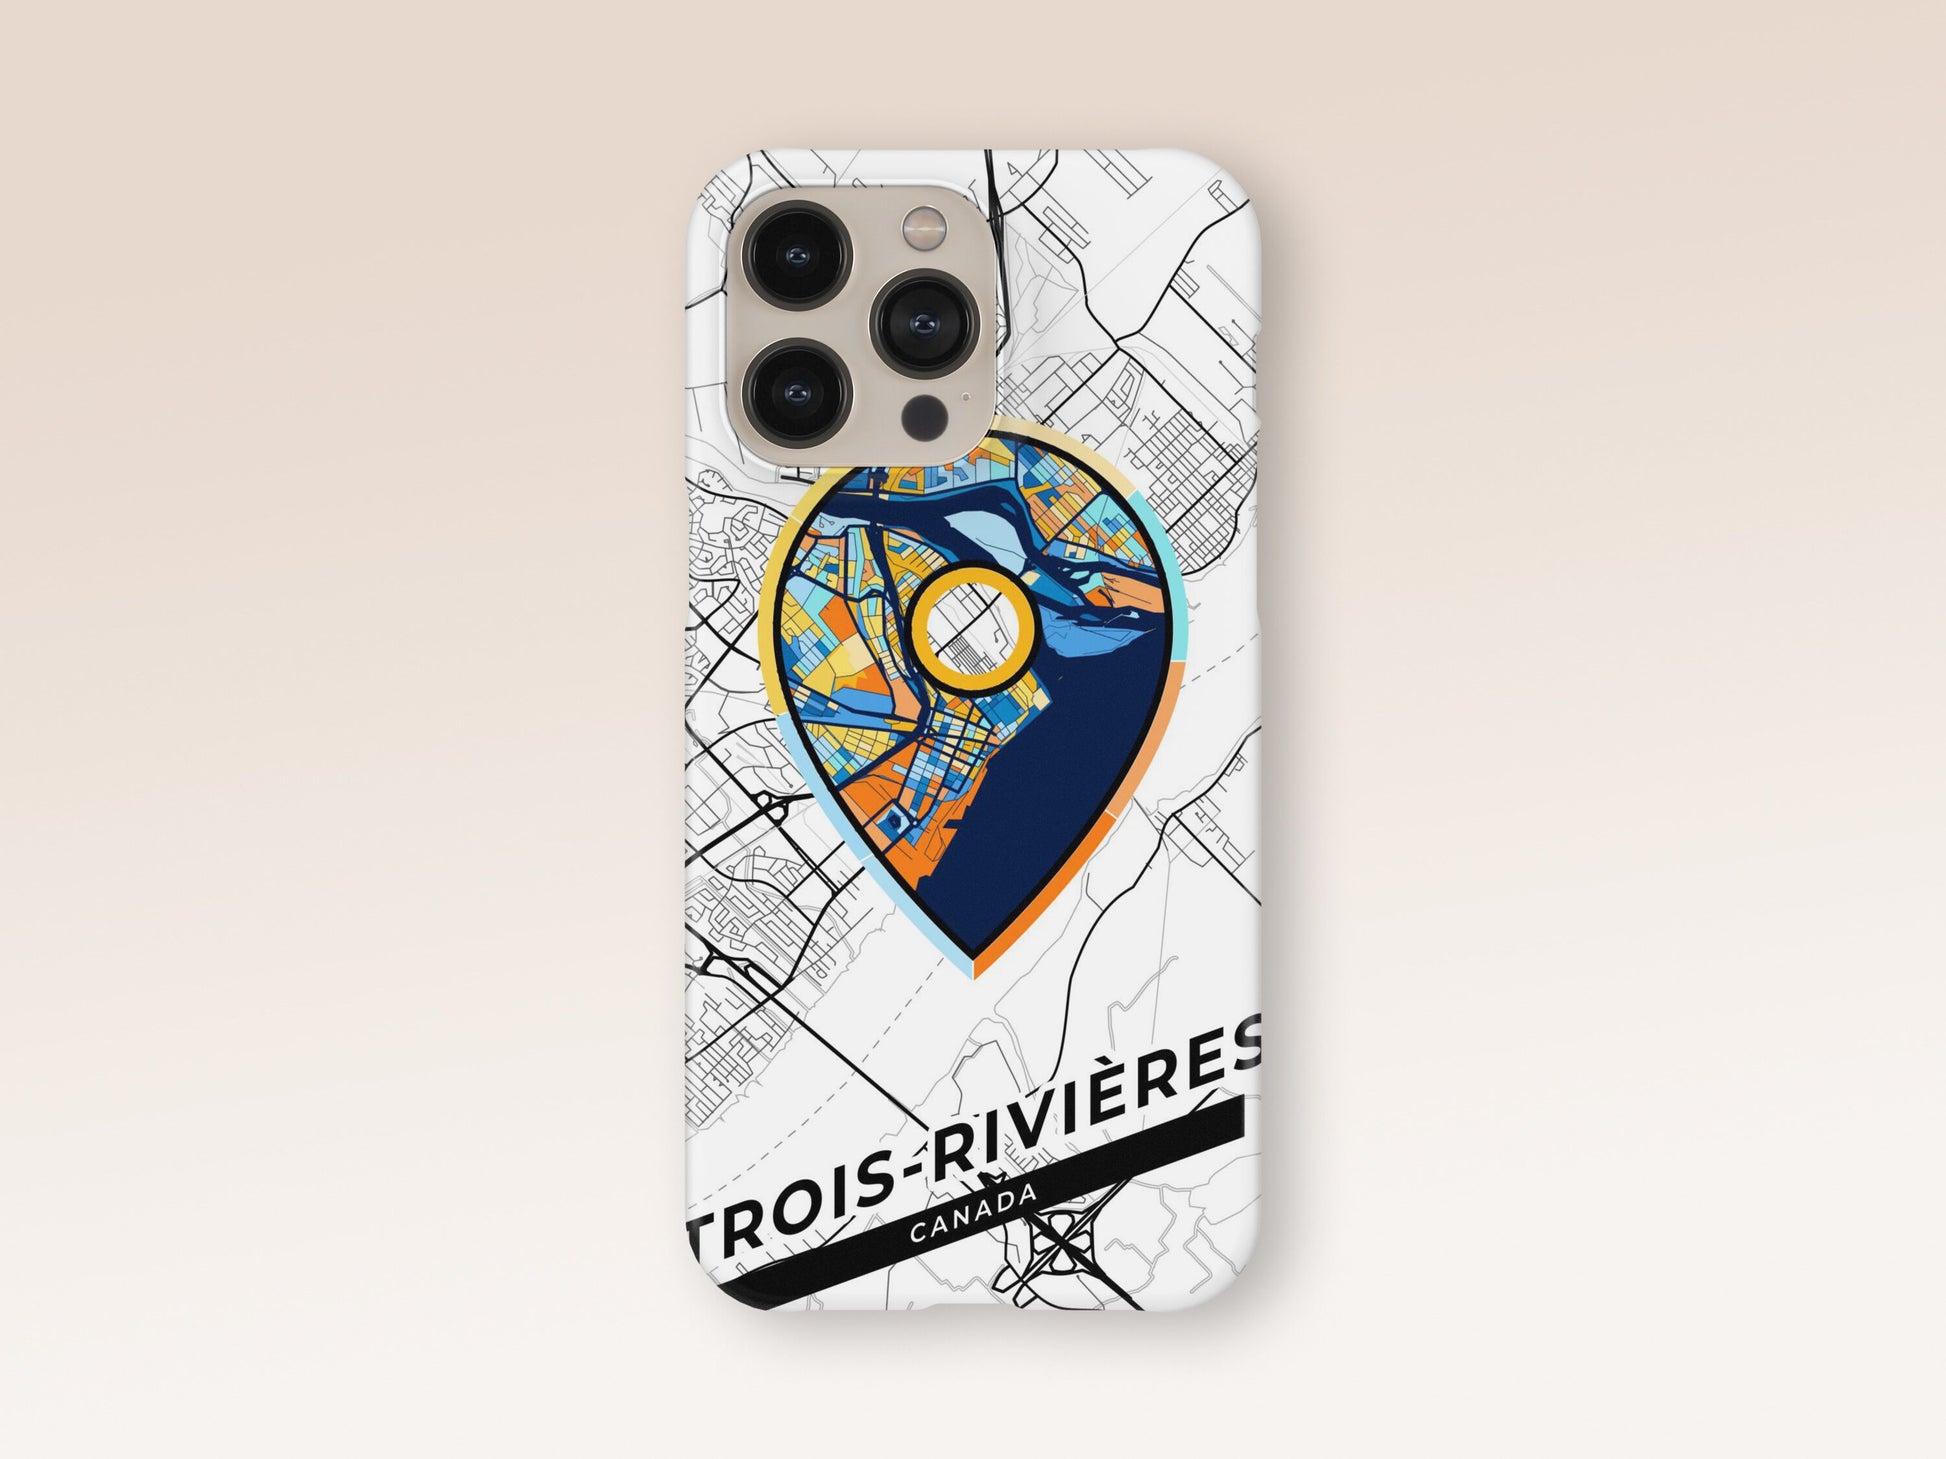 Trois-Rivières Canada slim phone case with colorful icon 1